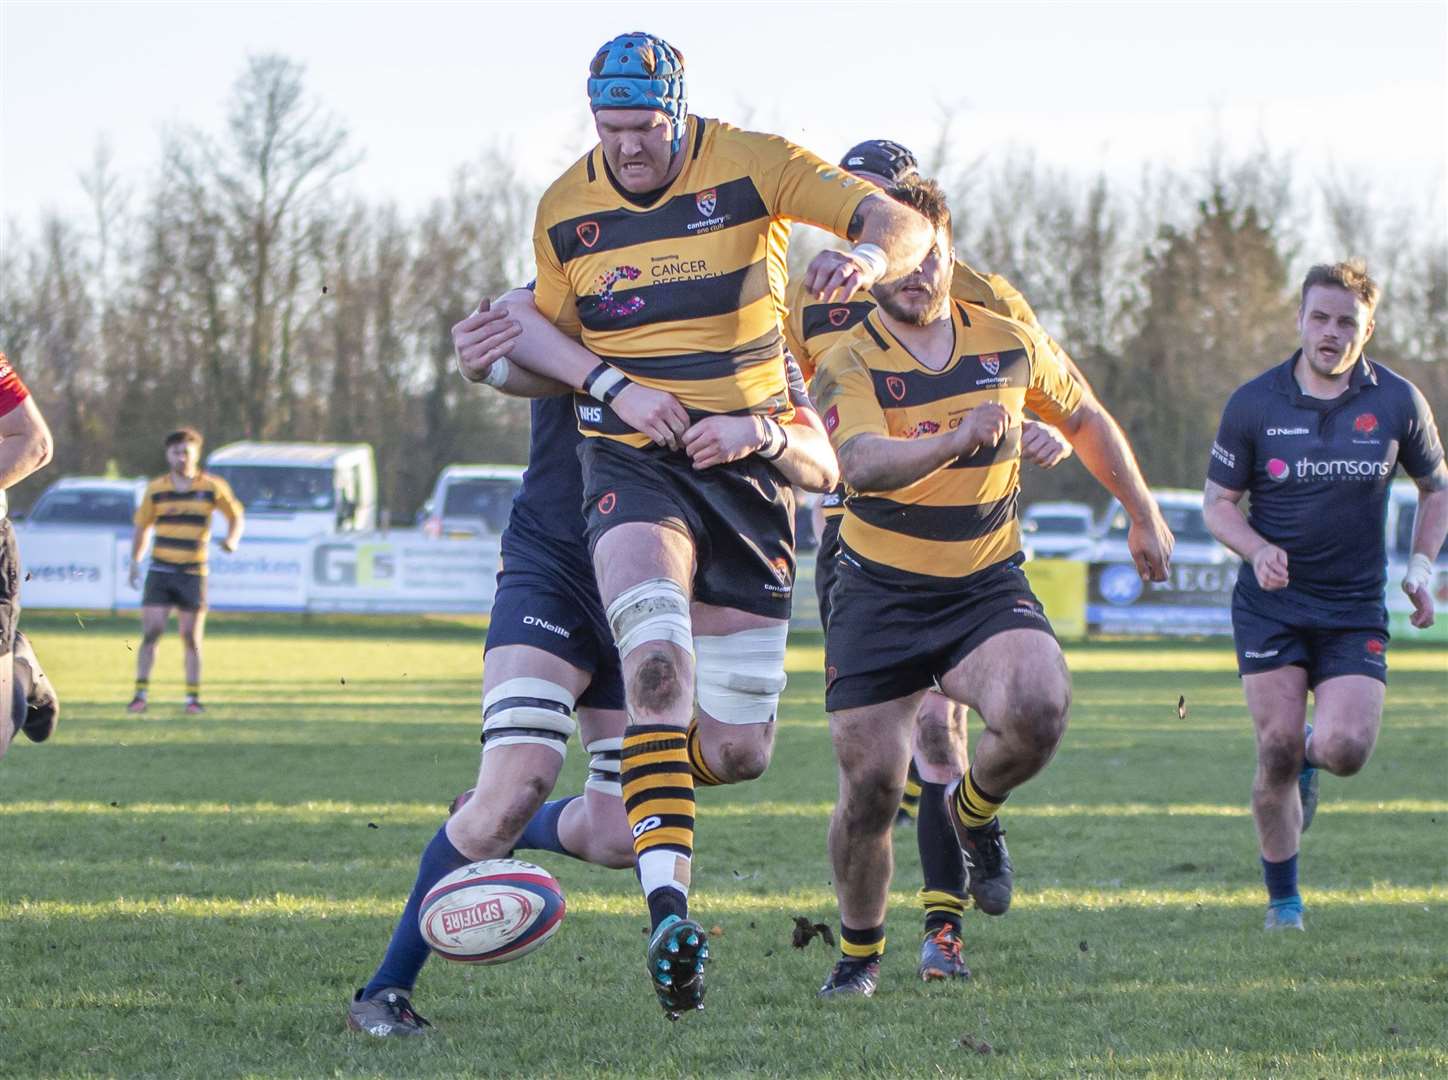 Dave Irvine, who has joined Canterbury Rugby Club after a loan spell last season from Tonbridge Juddians. Picture: Phillipa Hilton